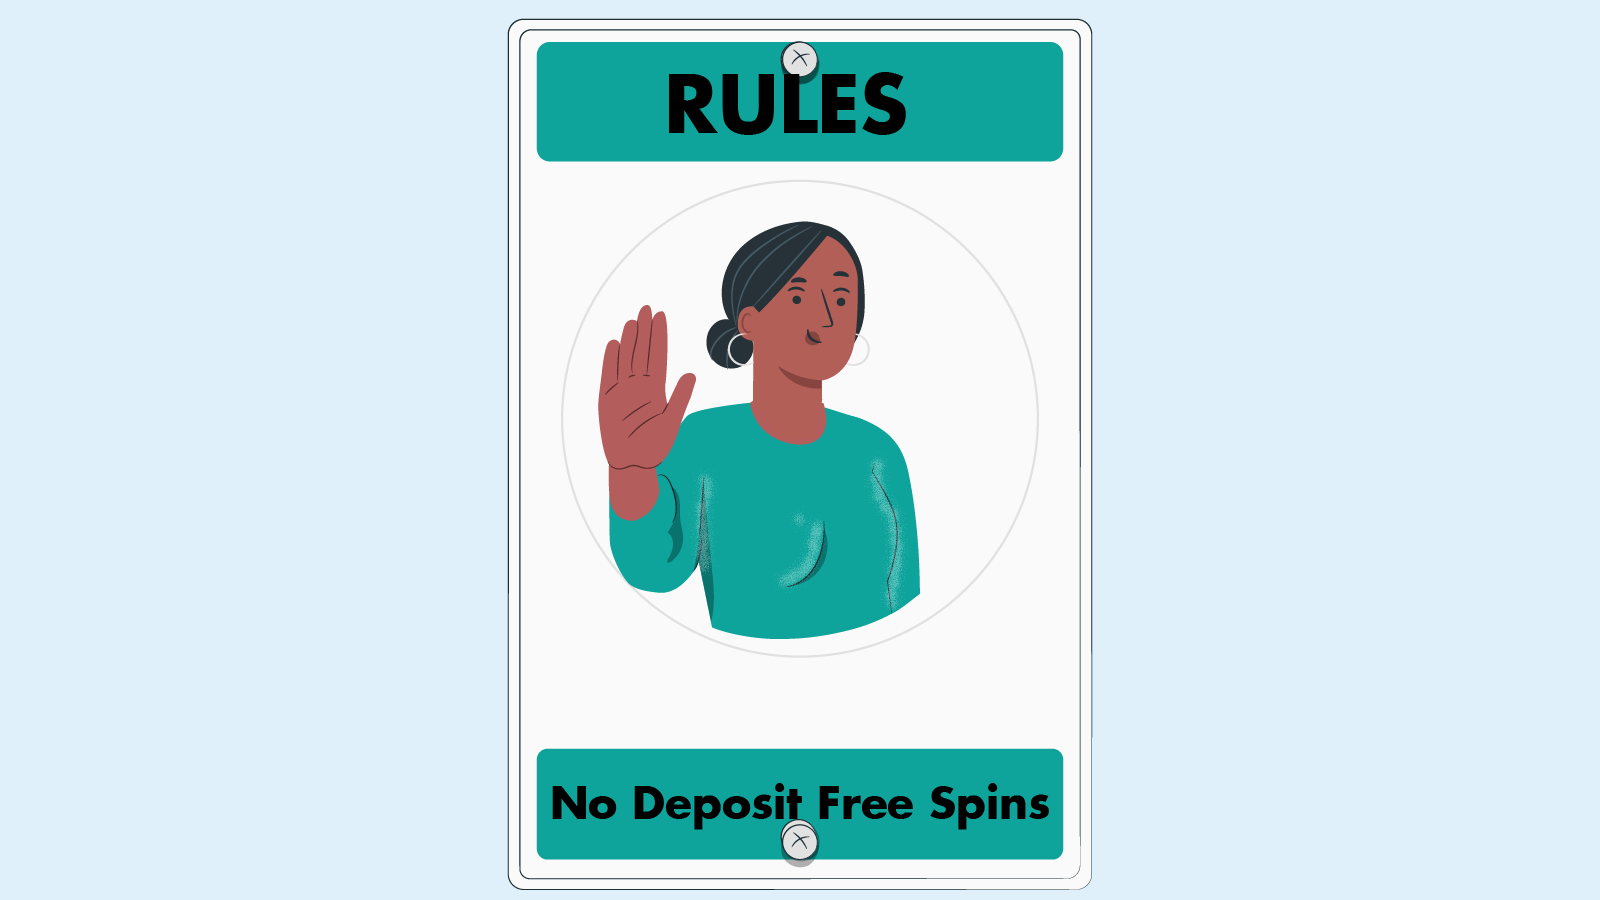 What are the rules of no deposit free spins